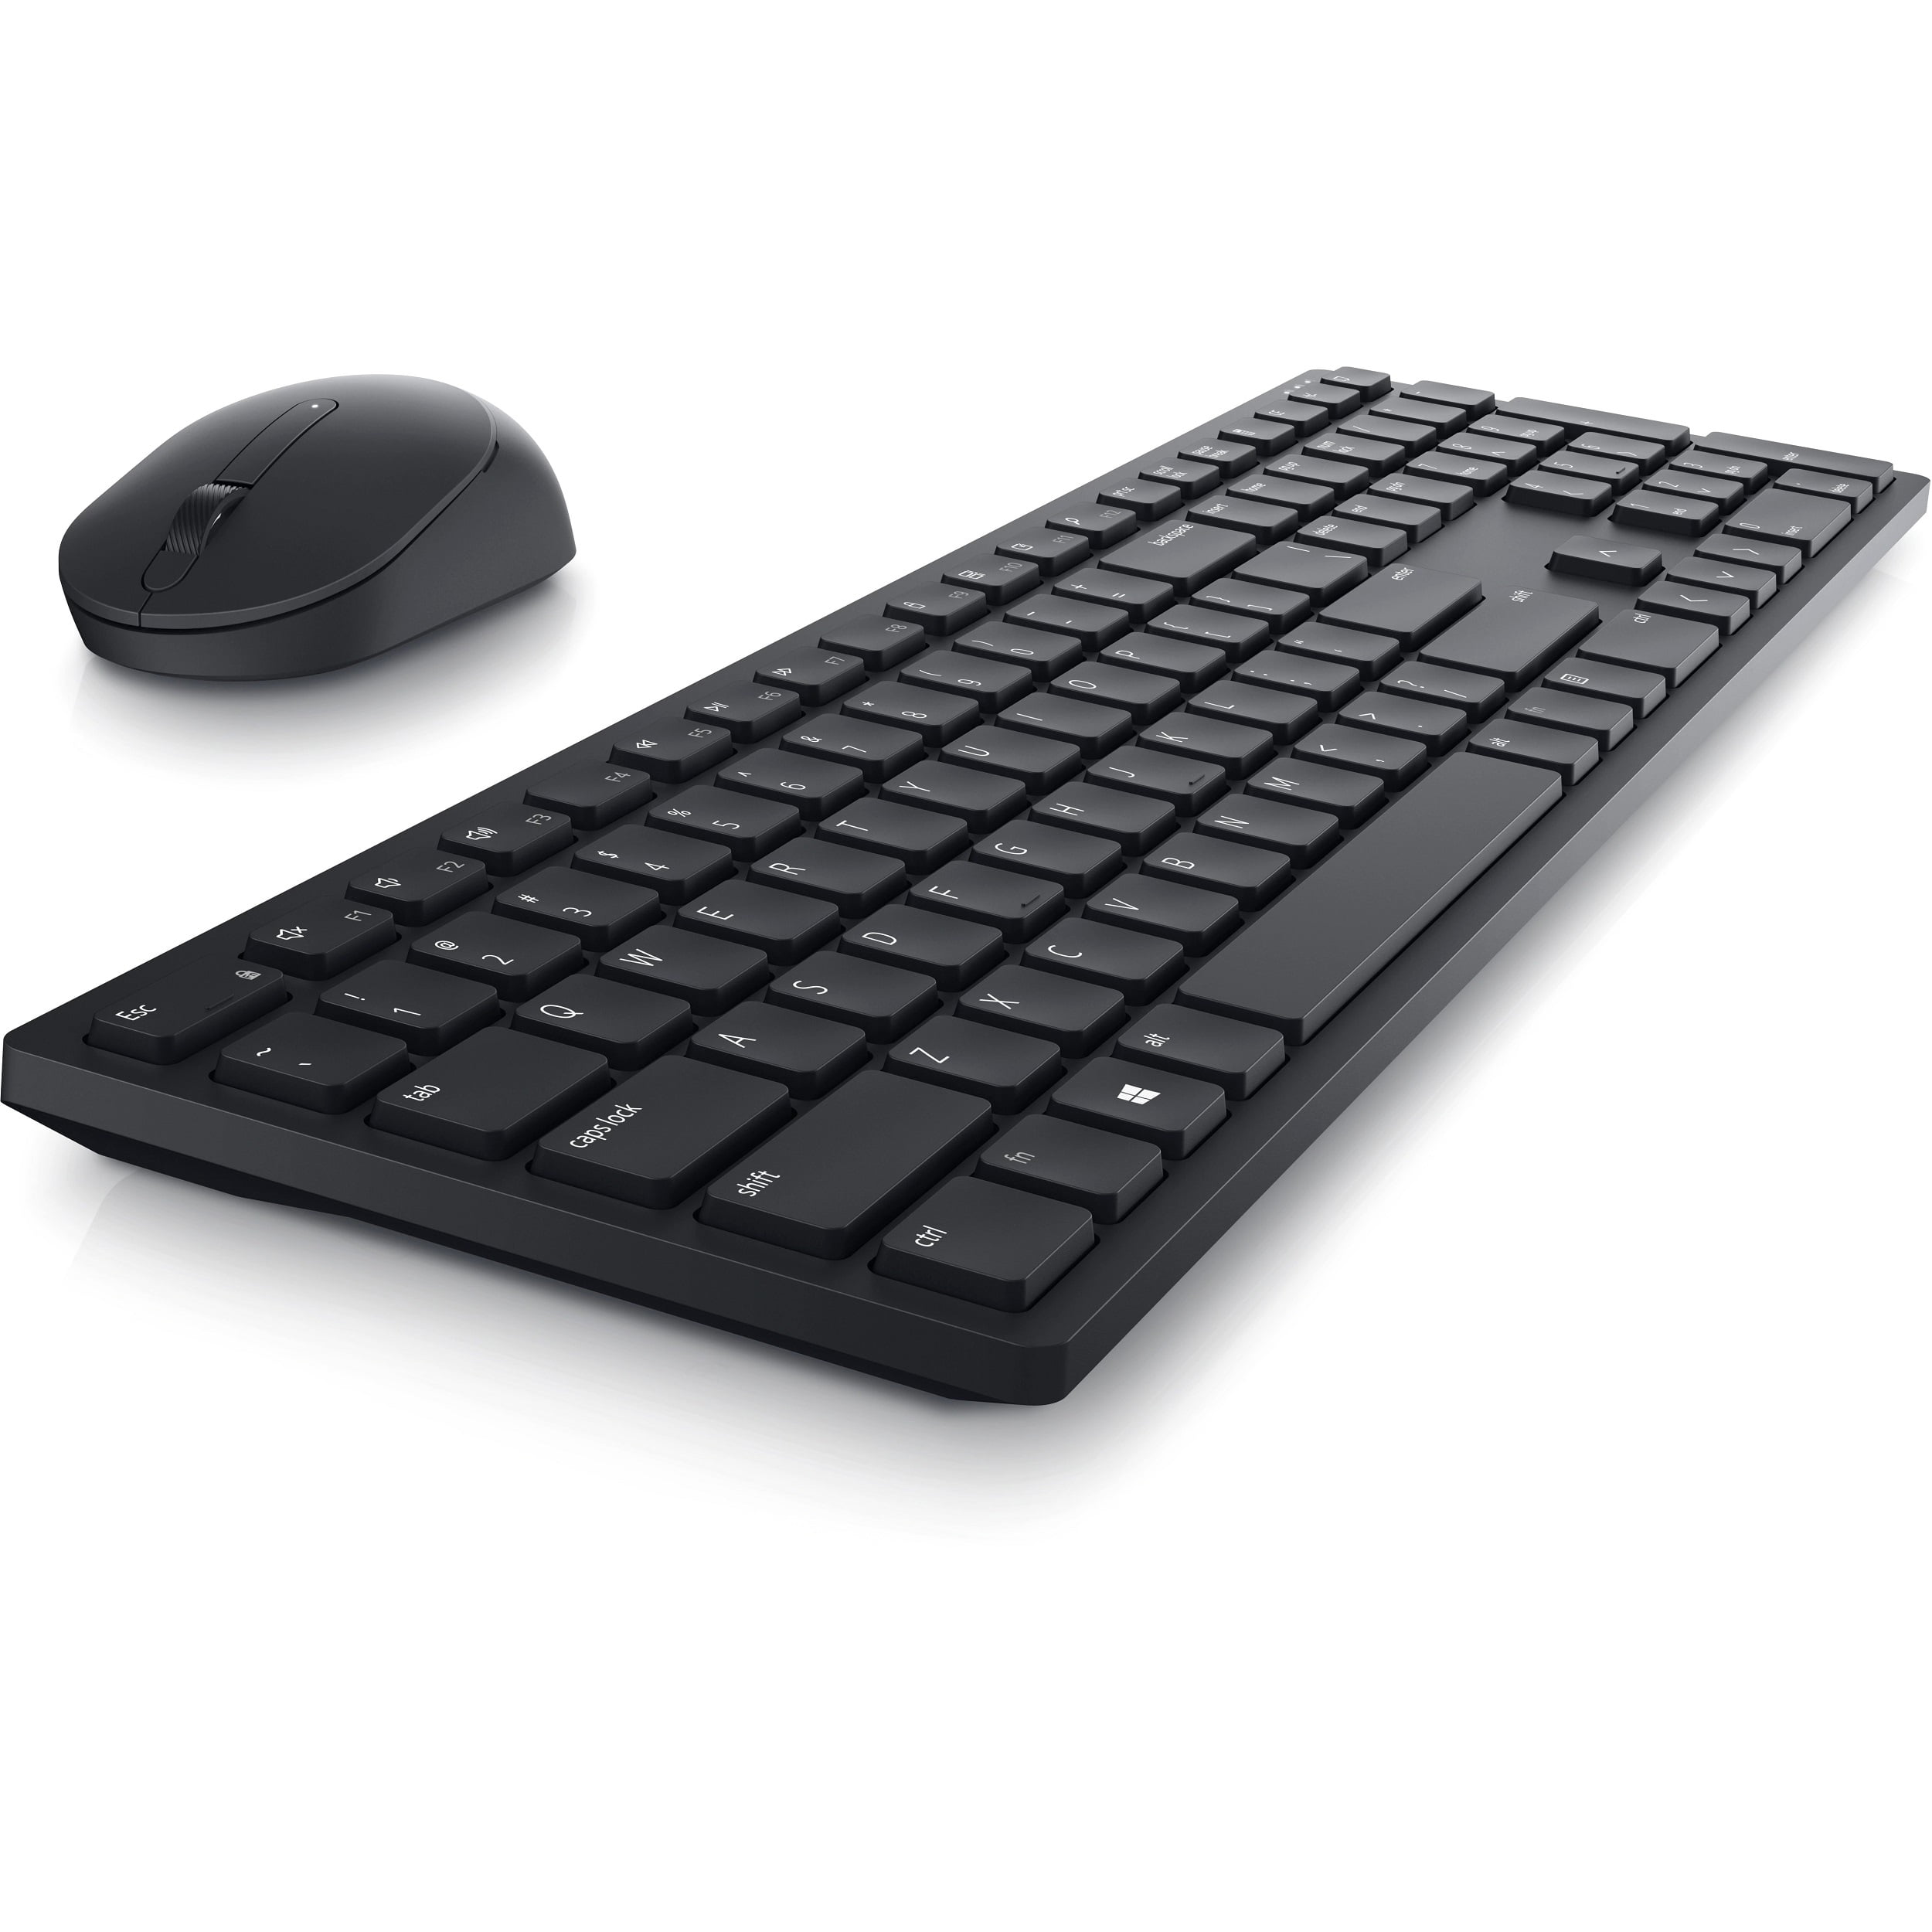 Mini Thin 2.4G Wireless Keyboard and Optical Mouse Combo Kit for Desktop lot rc 